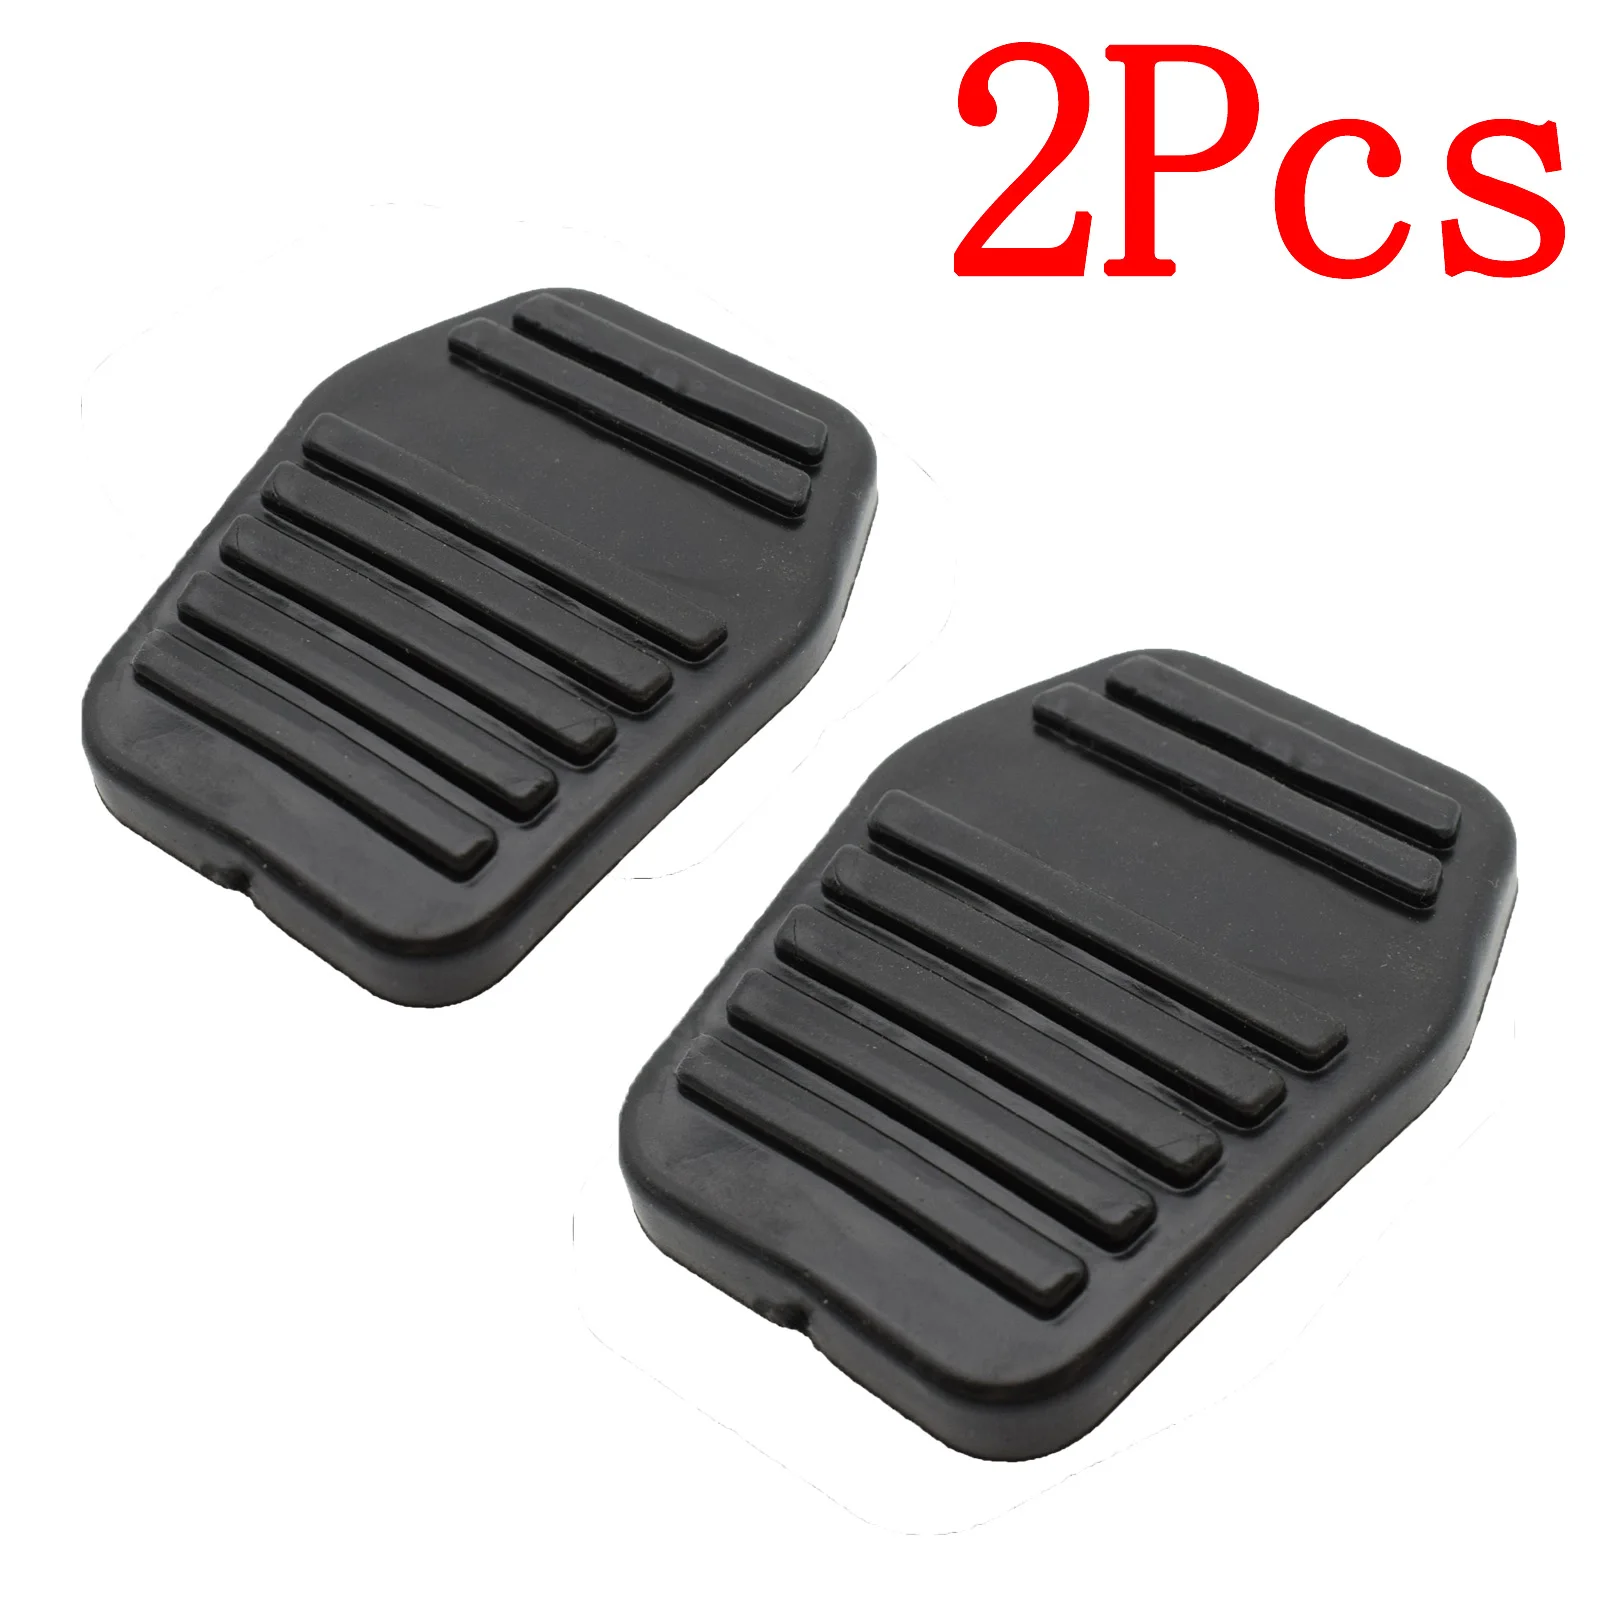 2Pcs Auto Car Brake Clutch Skid-proof Pedal Cover Pad Covers For Ford Transit - £11.08 GBP